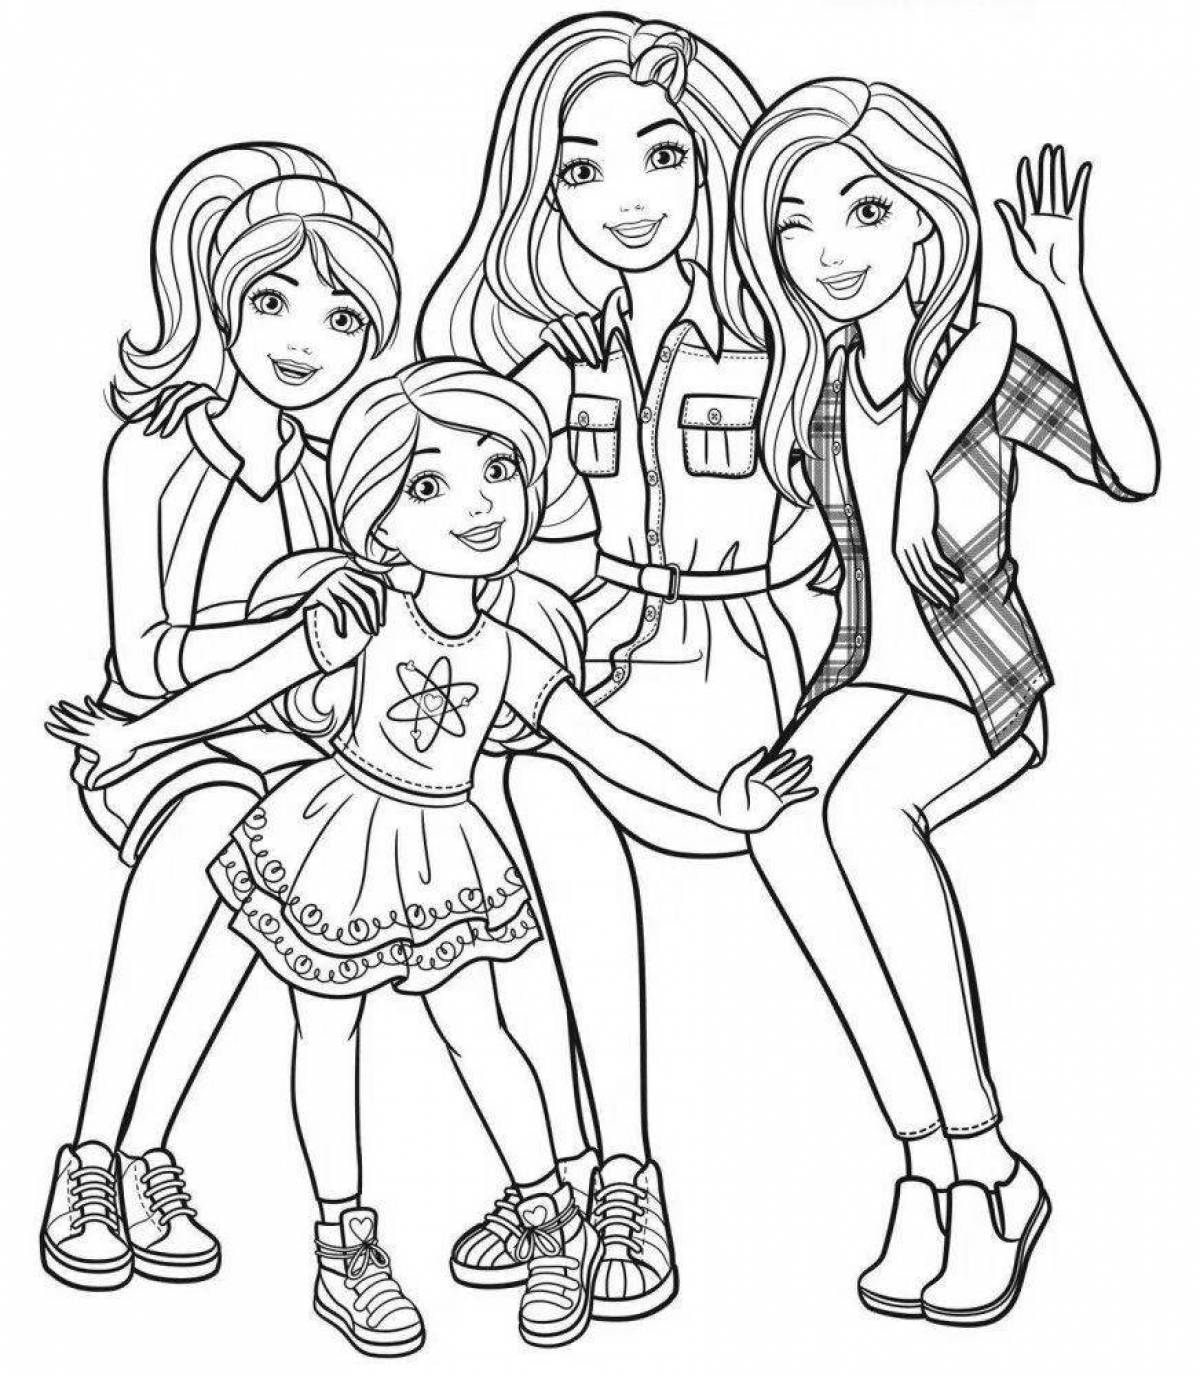 Colorful chelsea doll coloring page